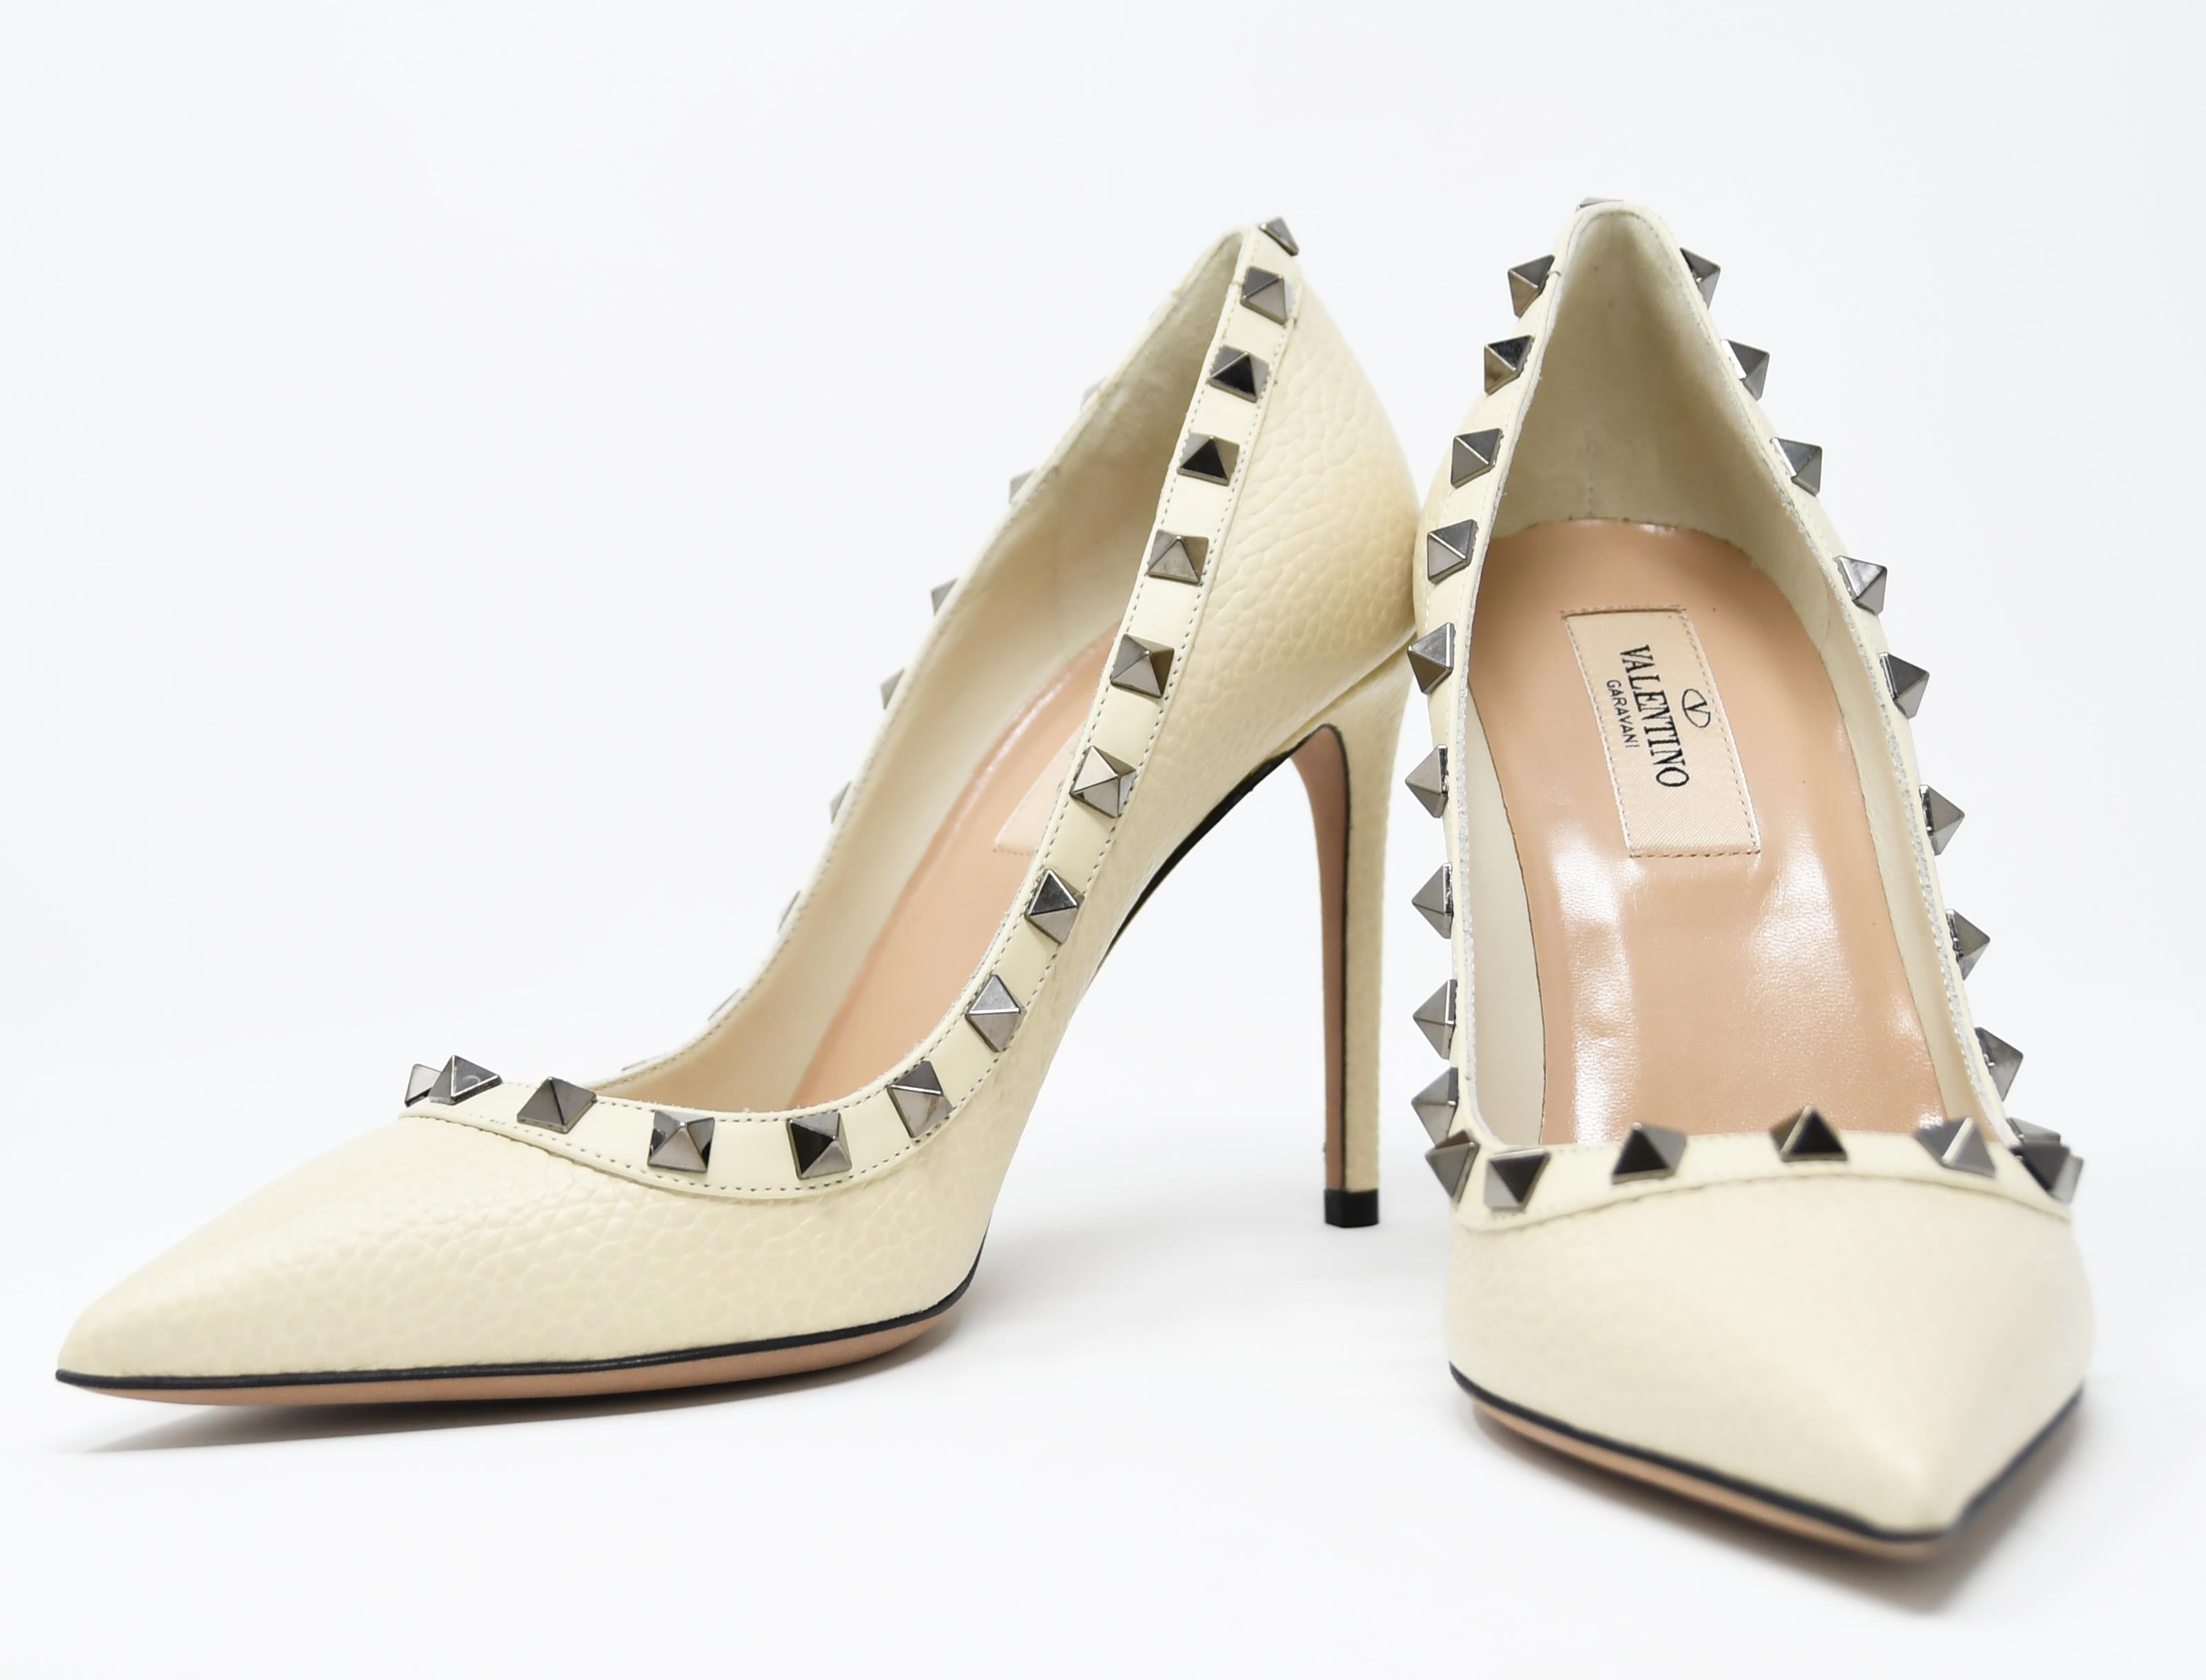 Valentino Rock Stud Off White Pebbled Leather Pumps - Size 36 1/2 In New Condition For Sale In Newport, RI